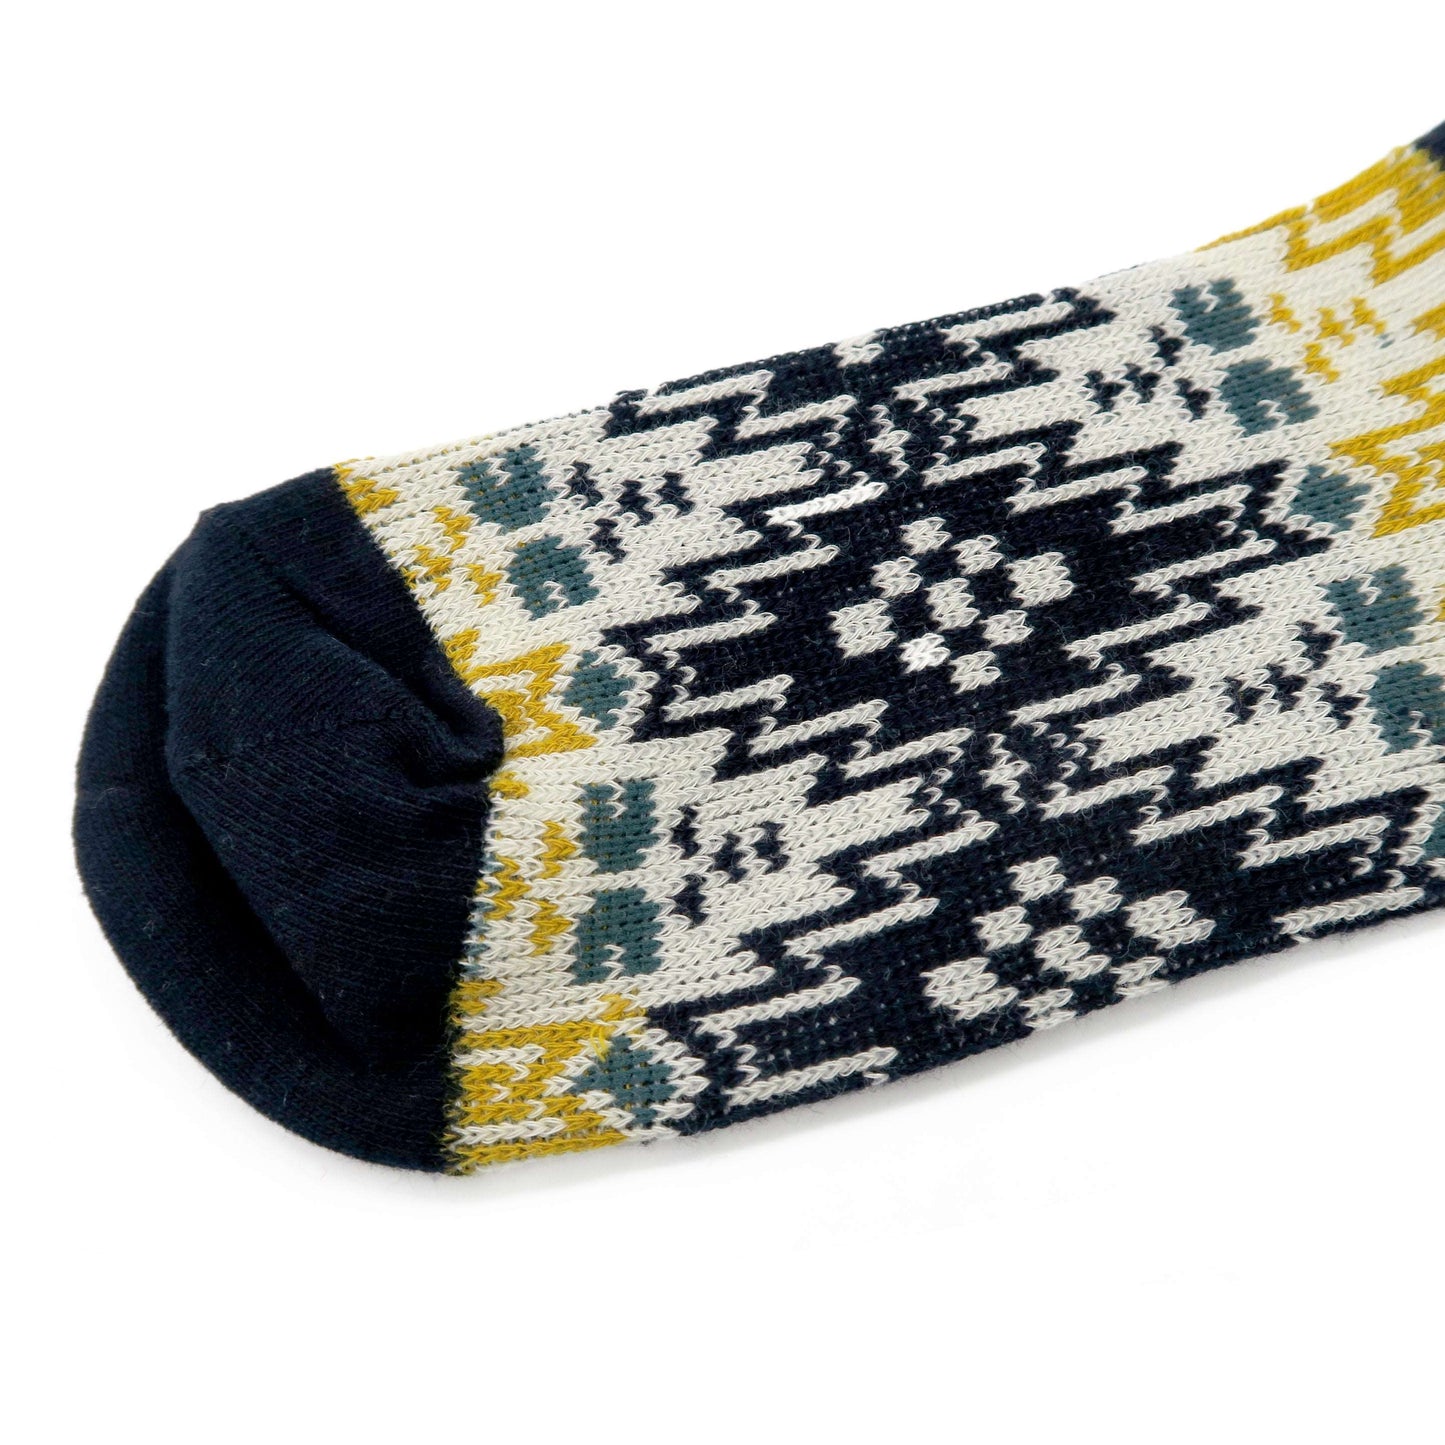 Maze pattern black and yellow color low sock